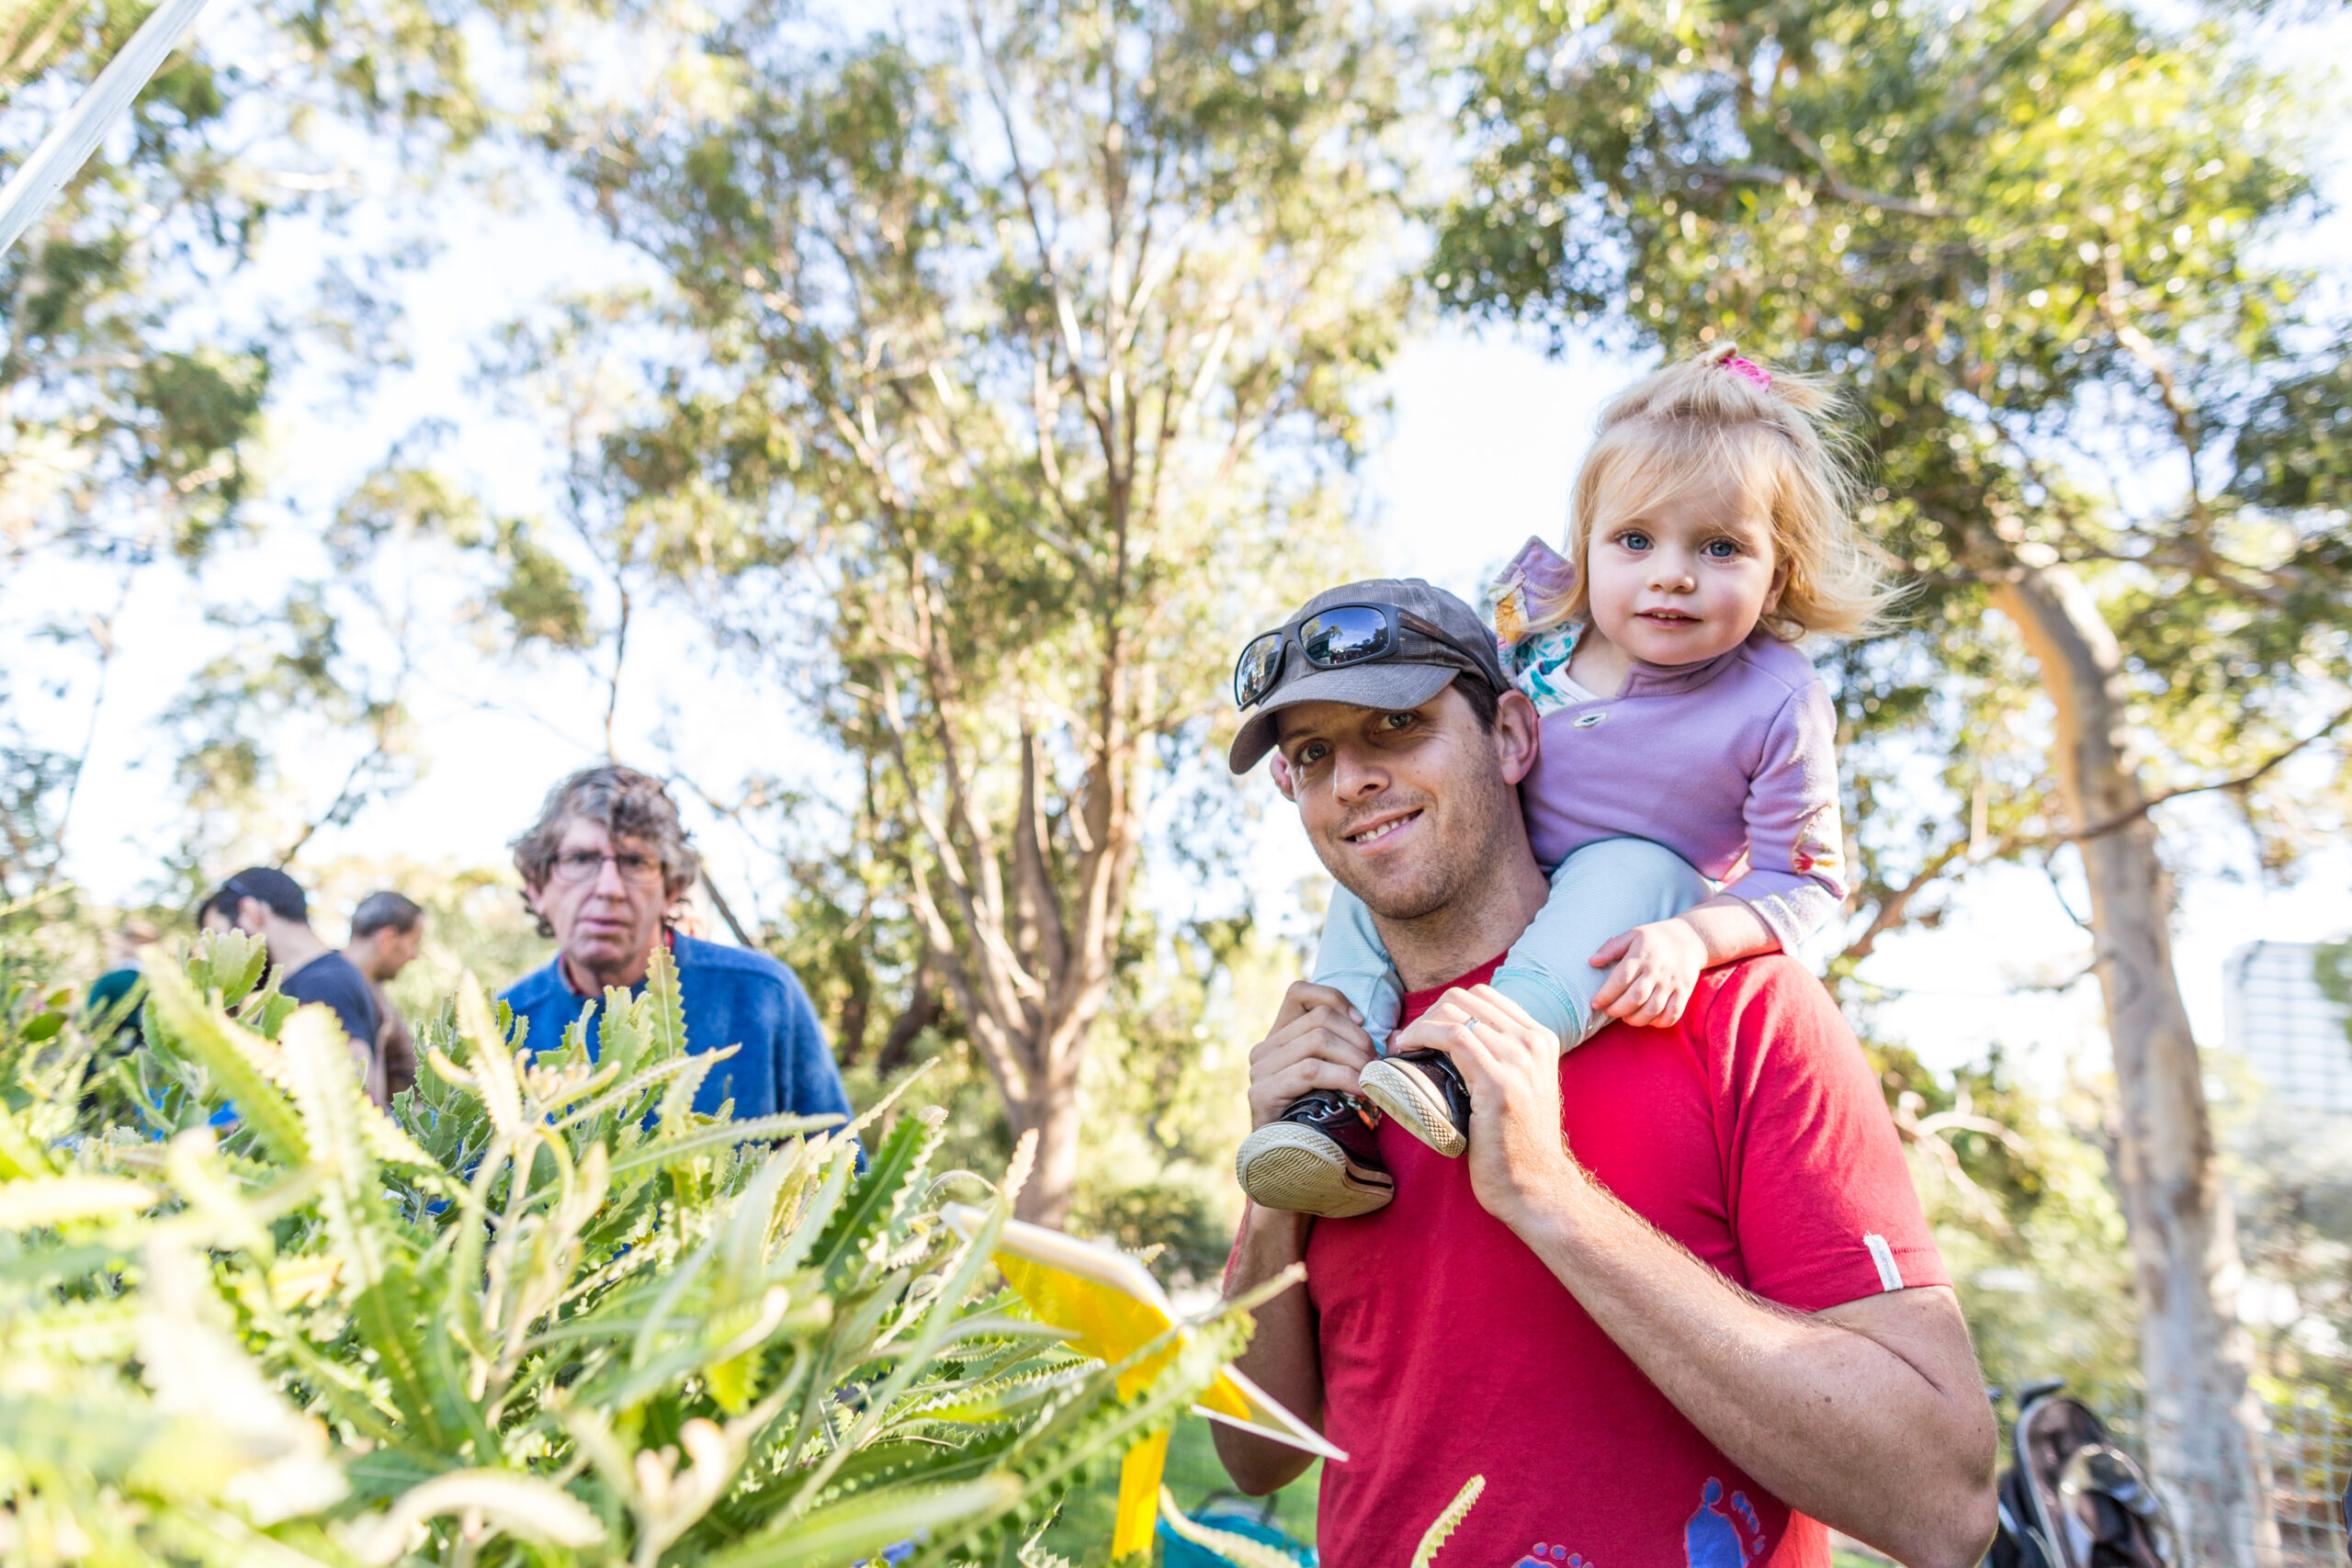 This photograph shows a family on a walk trail at Kings Park. Three (3) people are looking towards the camera, and the person closest to the camera is holding a small child on their shoulders. They are standing in front of a green banksia bush. Tall trees surround the area, with cream coloured trunks and green foliage. The sun appears to be white and is seen through the trees.